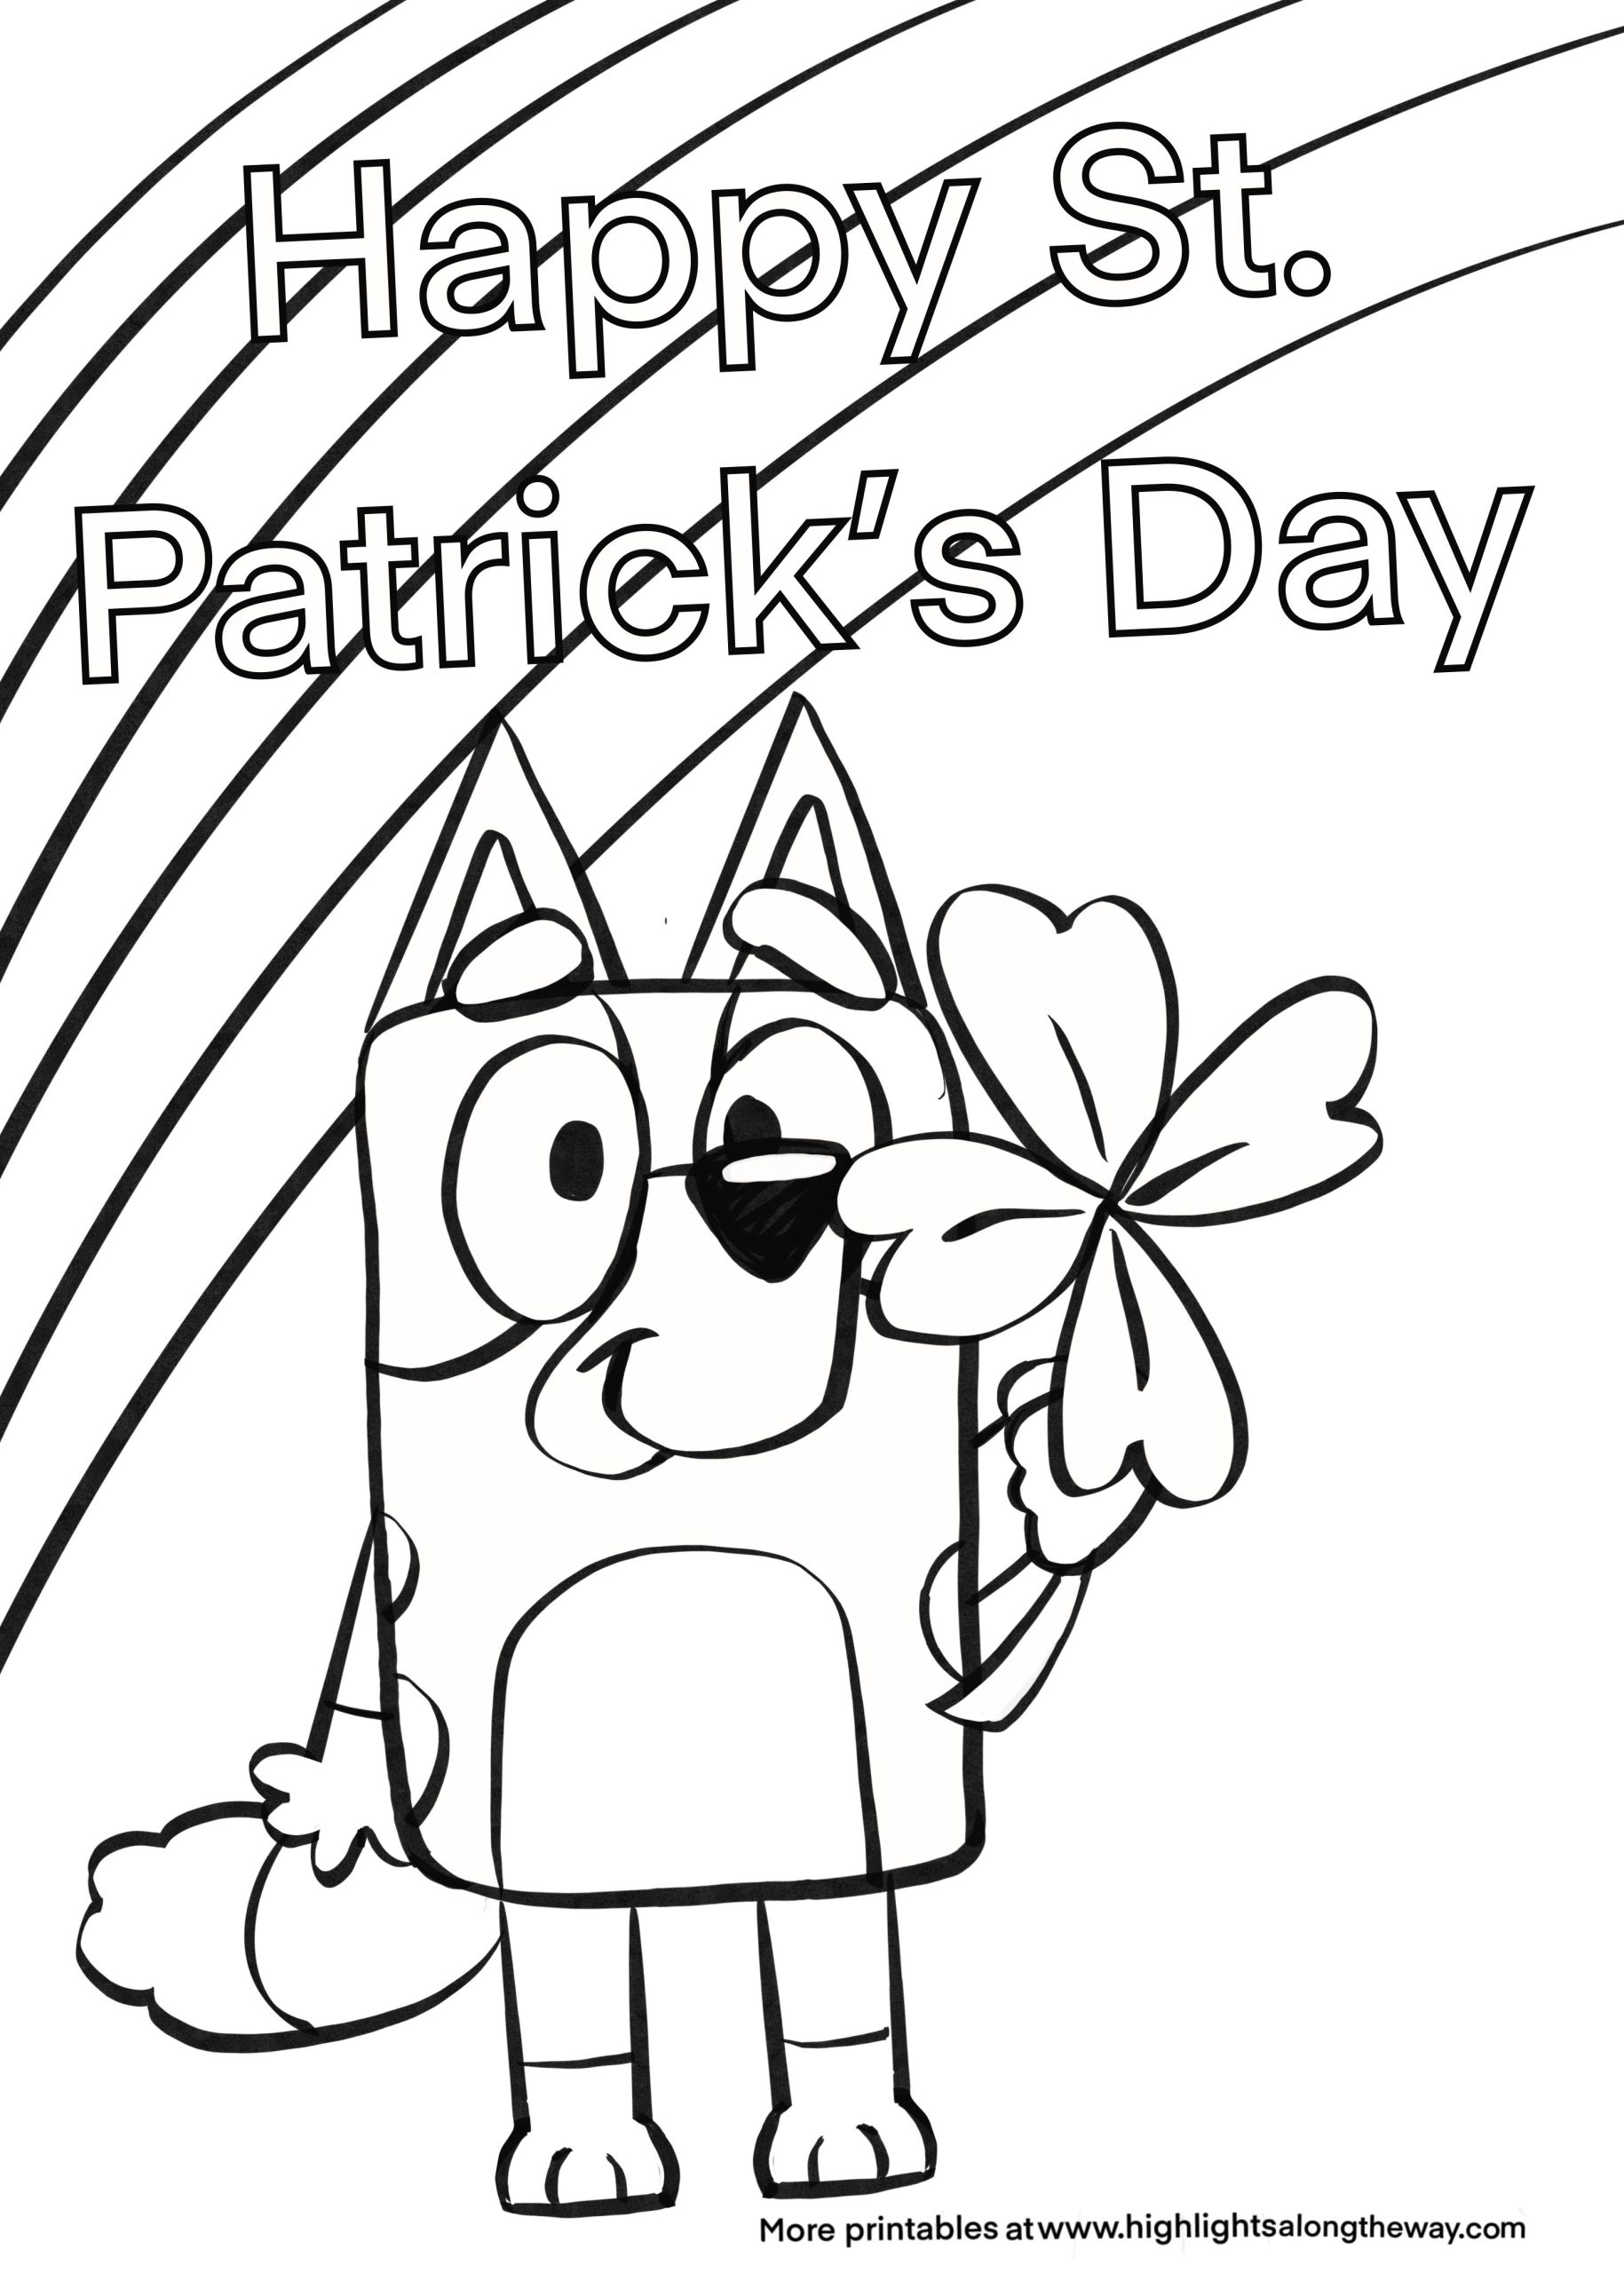 Bluey St. Patrick's Day Coloring Page Instant Download